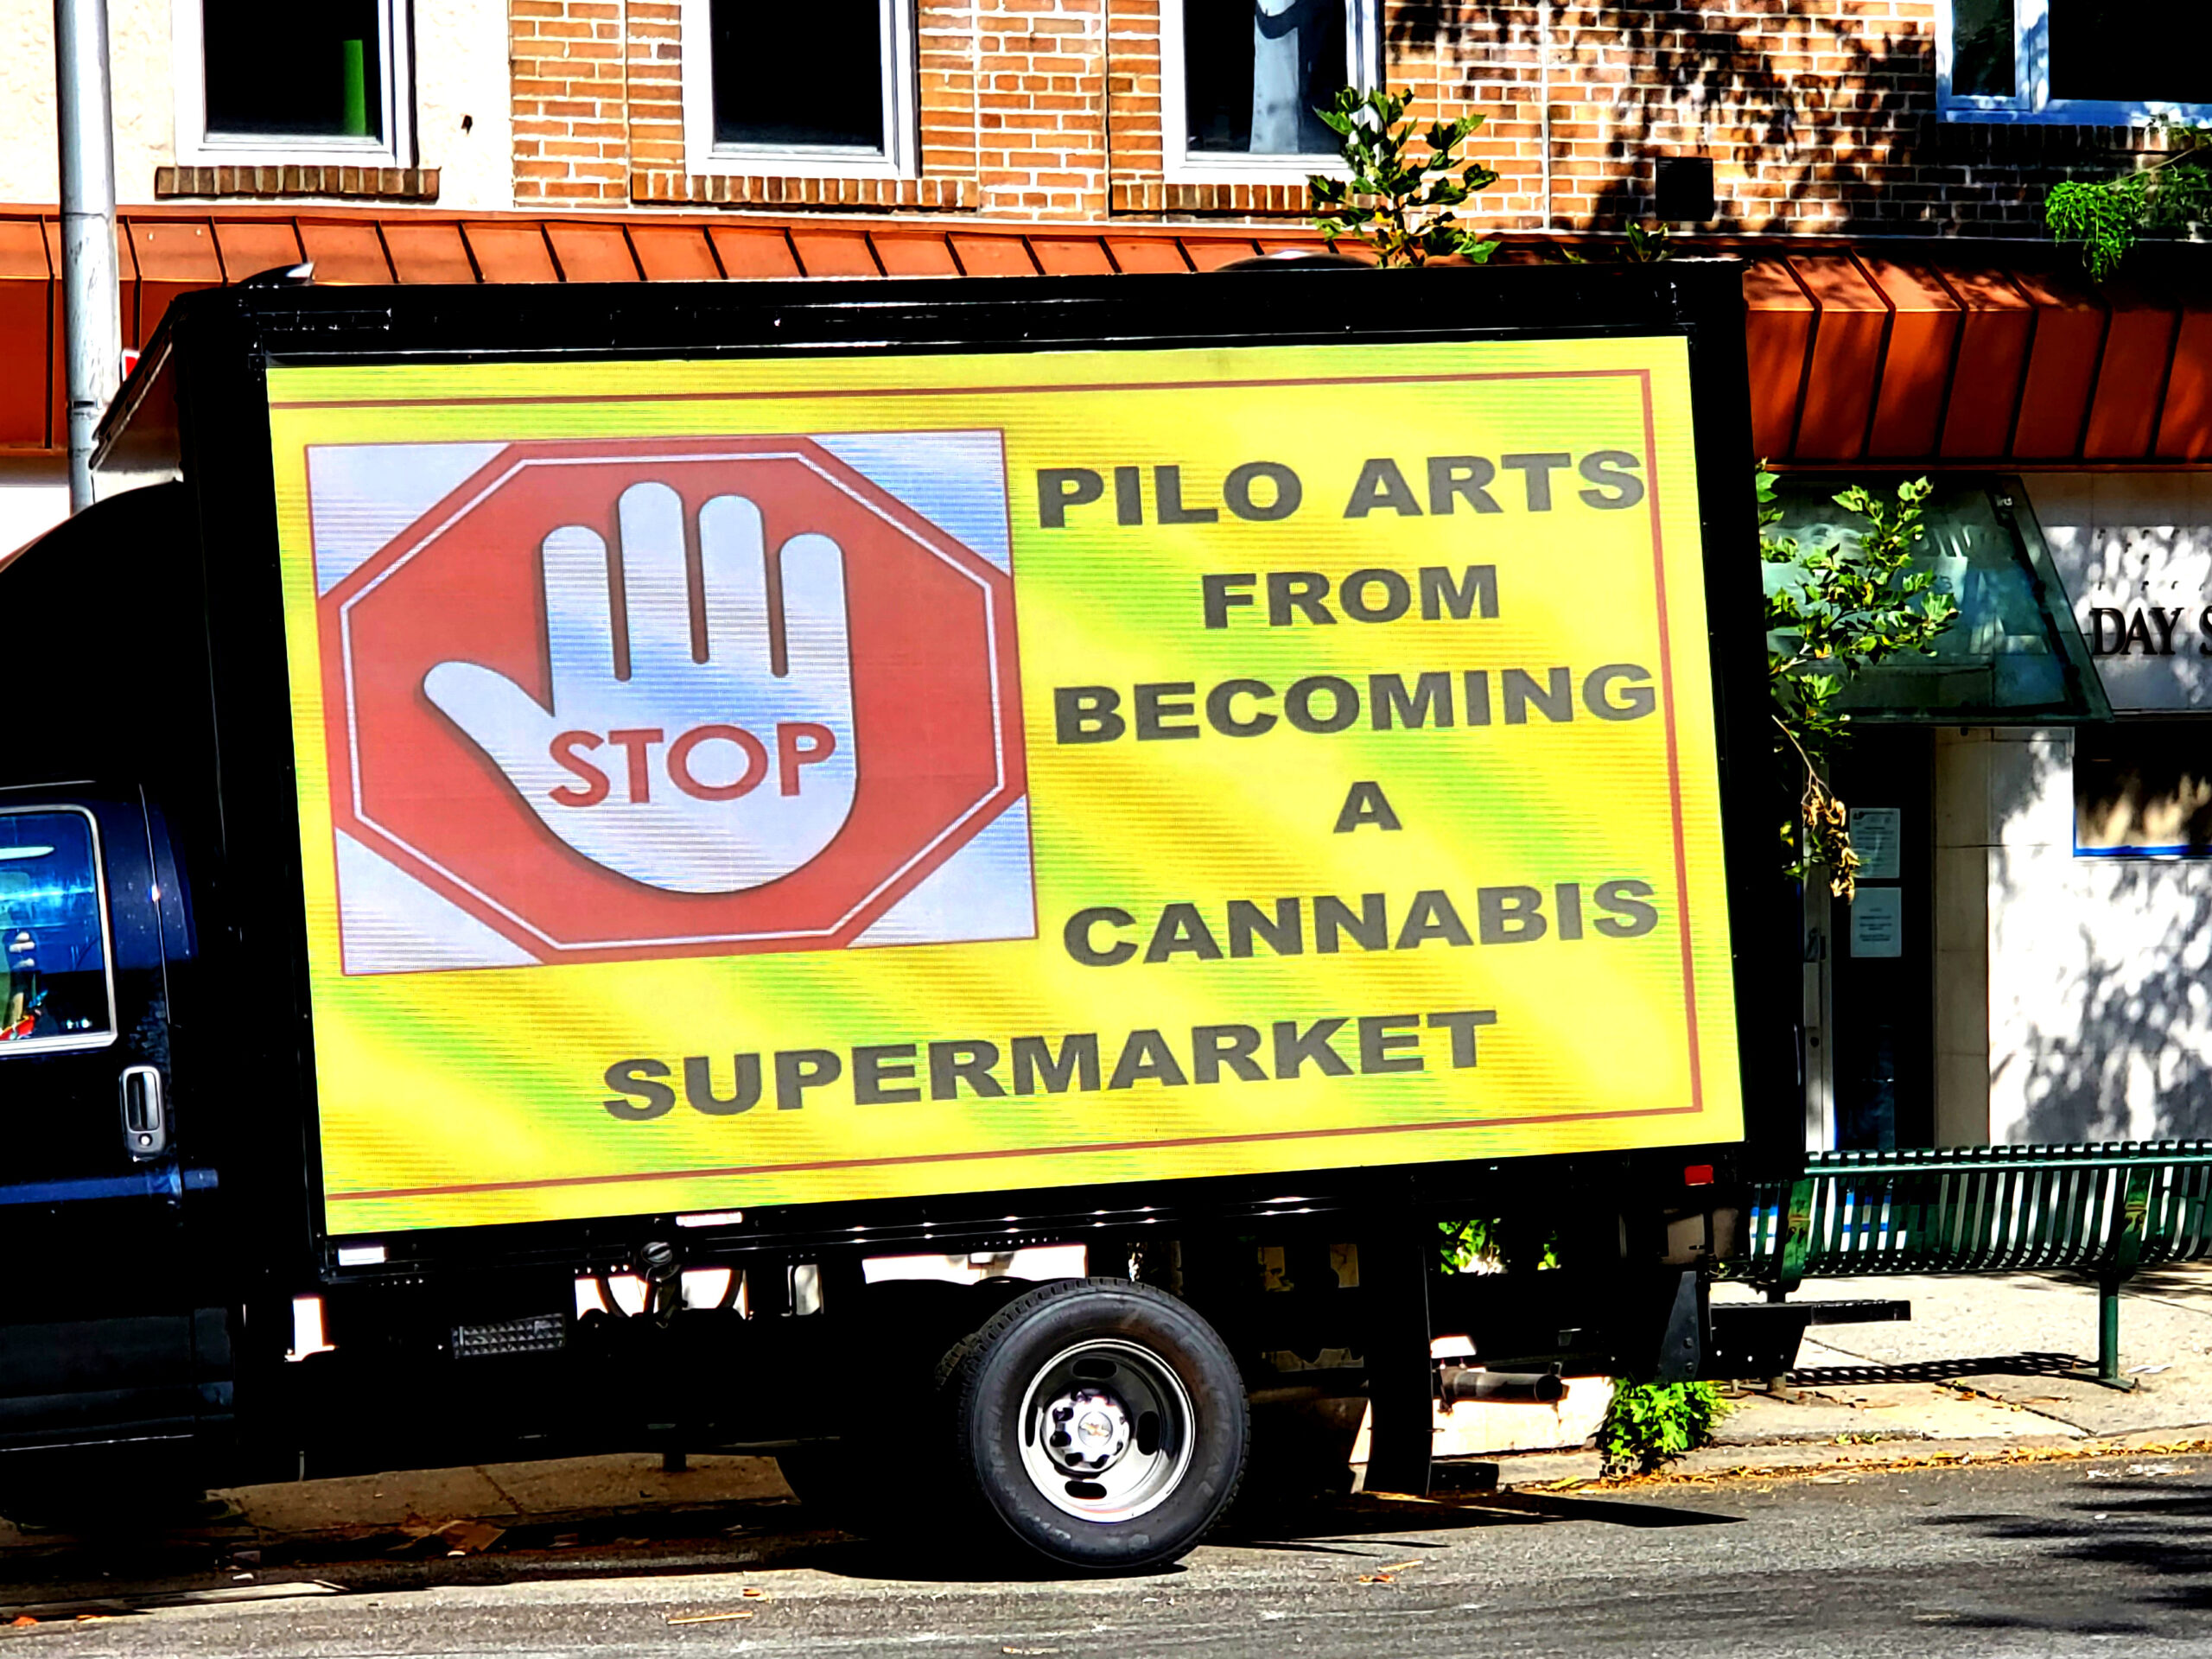 The former Pilo Arts hair salon, located at 8412 Third Avenue, could potentially become a “cannabis supermarket.” Brooklyn Eagle photo by Arthur DeGaeta